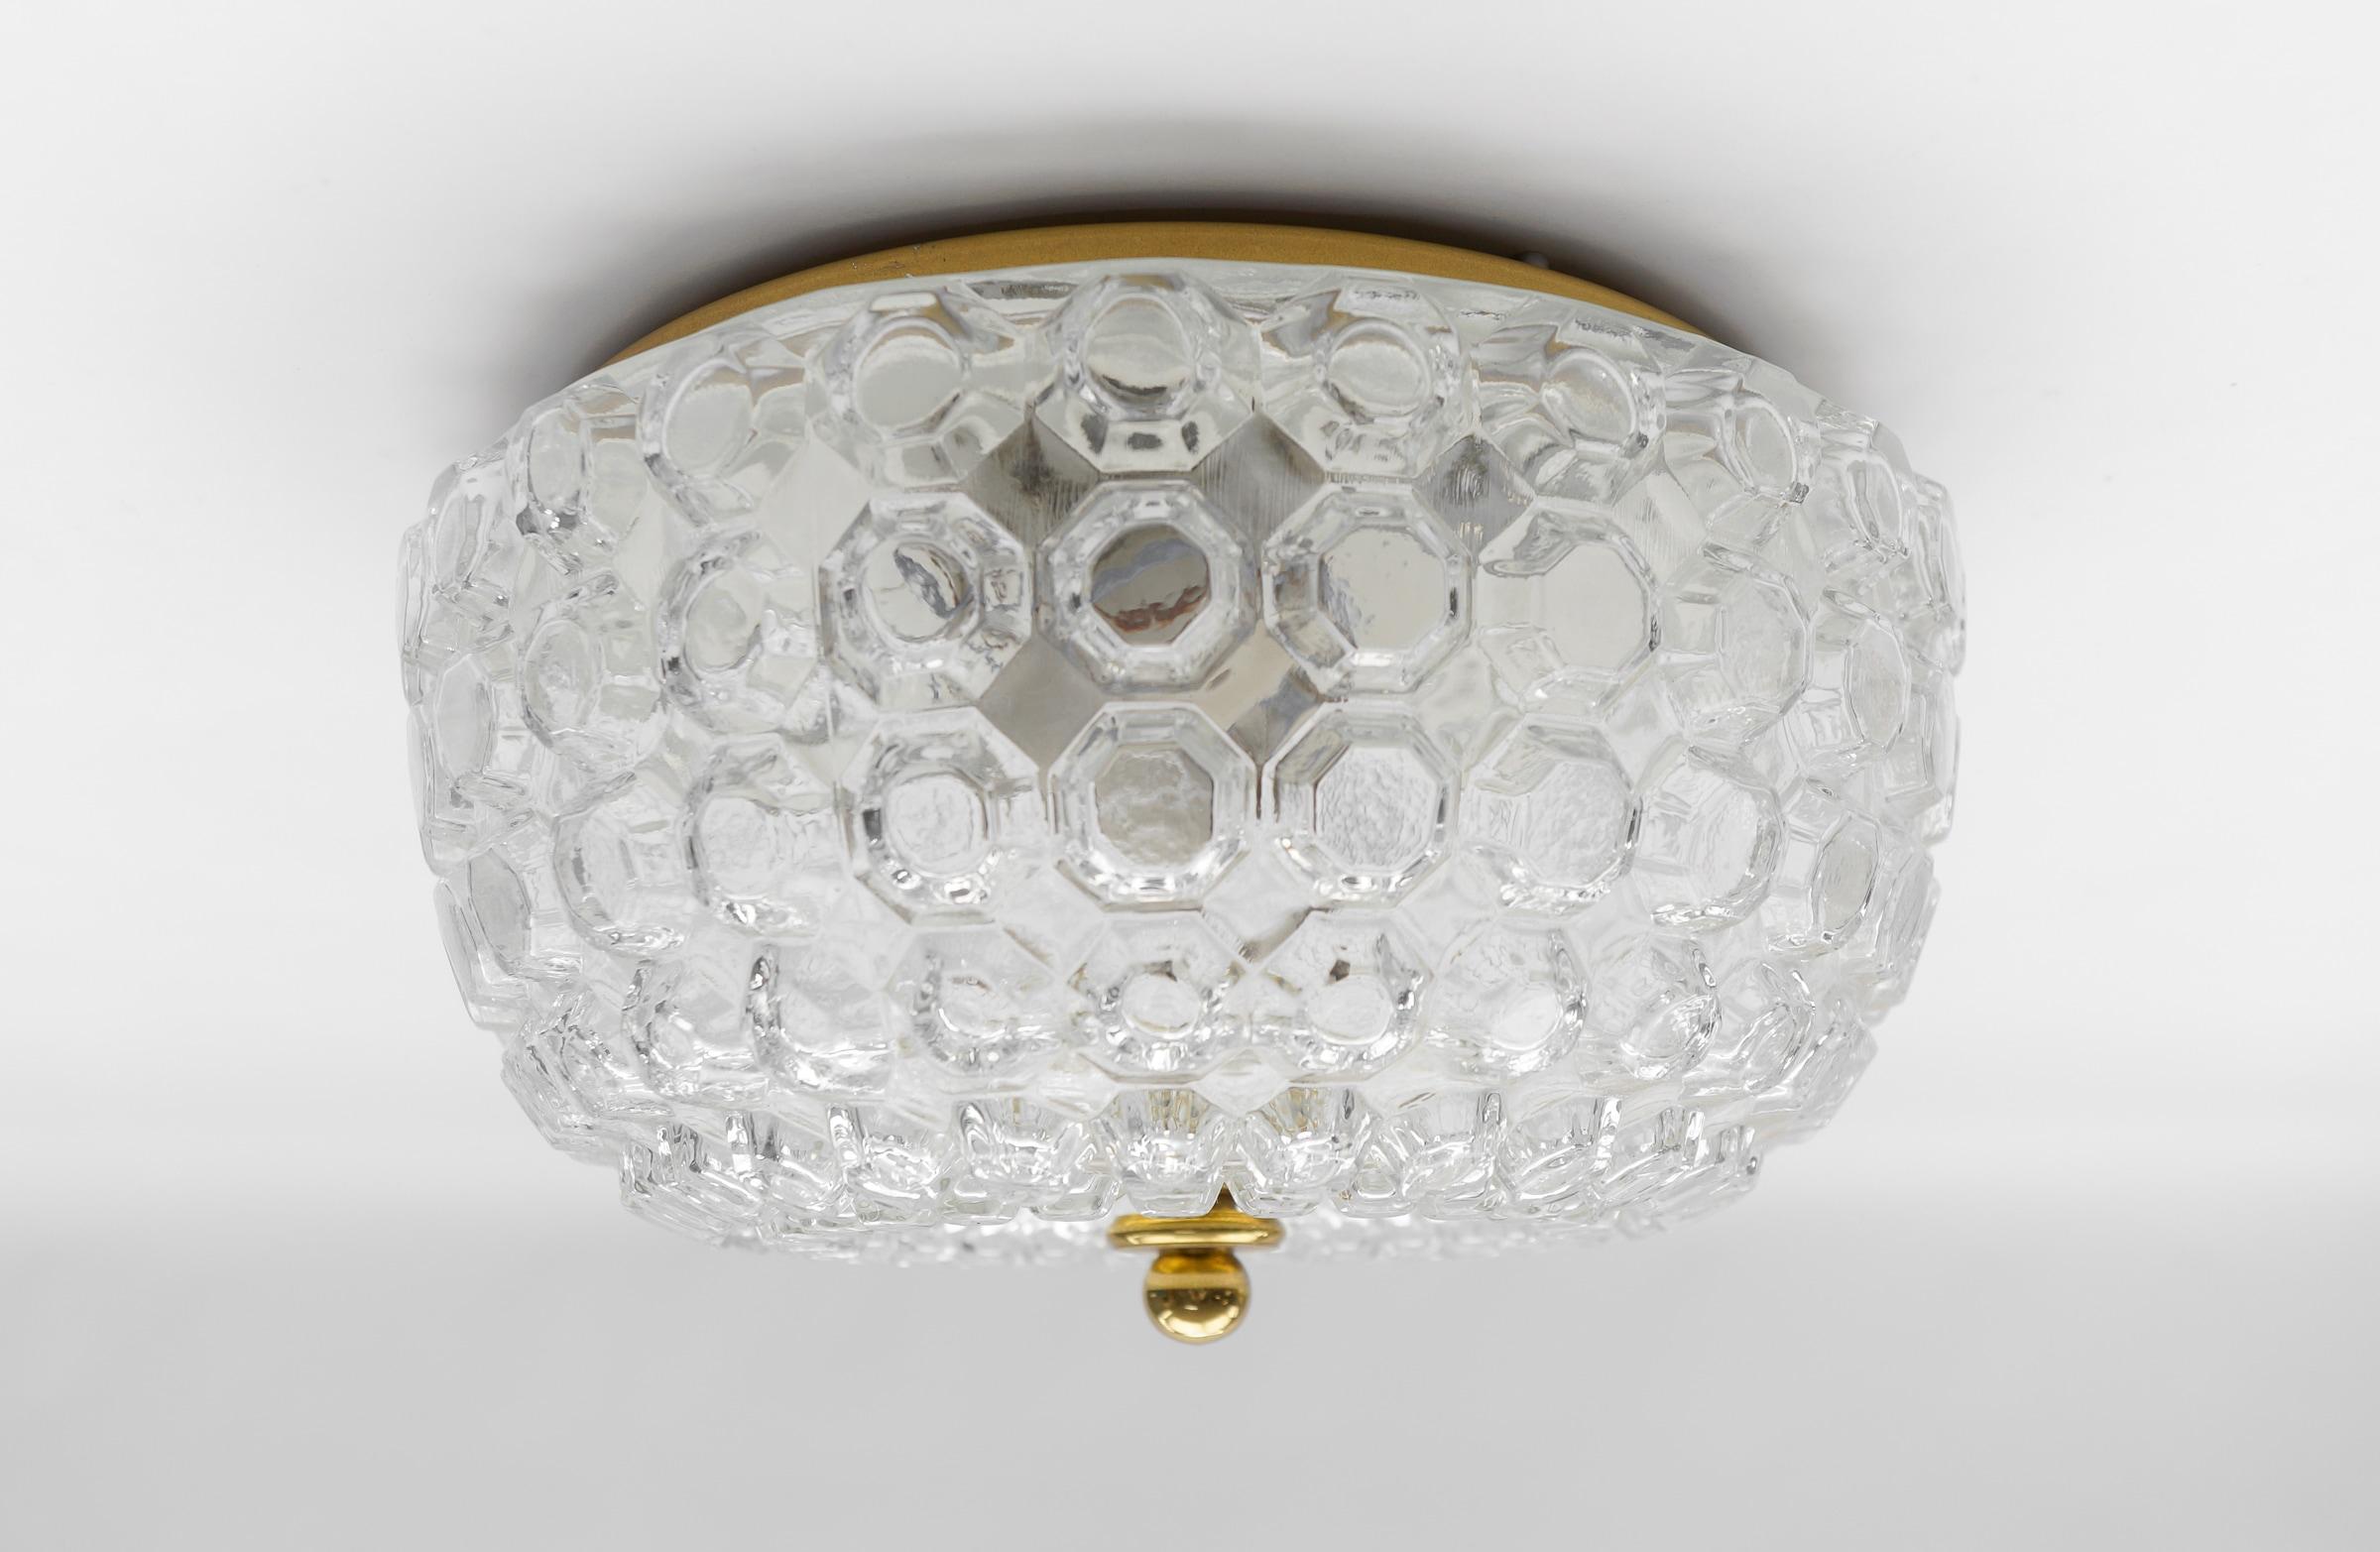 1 of 4 Large Flush Mount Lamp in Glass by Limburg, Gerrmany 1960s

We have four different sizes of the same model with 4 pieces per size which can also be found here on the platform.

The fixture need 1 x E27 standard bulb.

Light bulbs are not